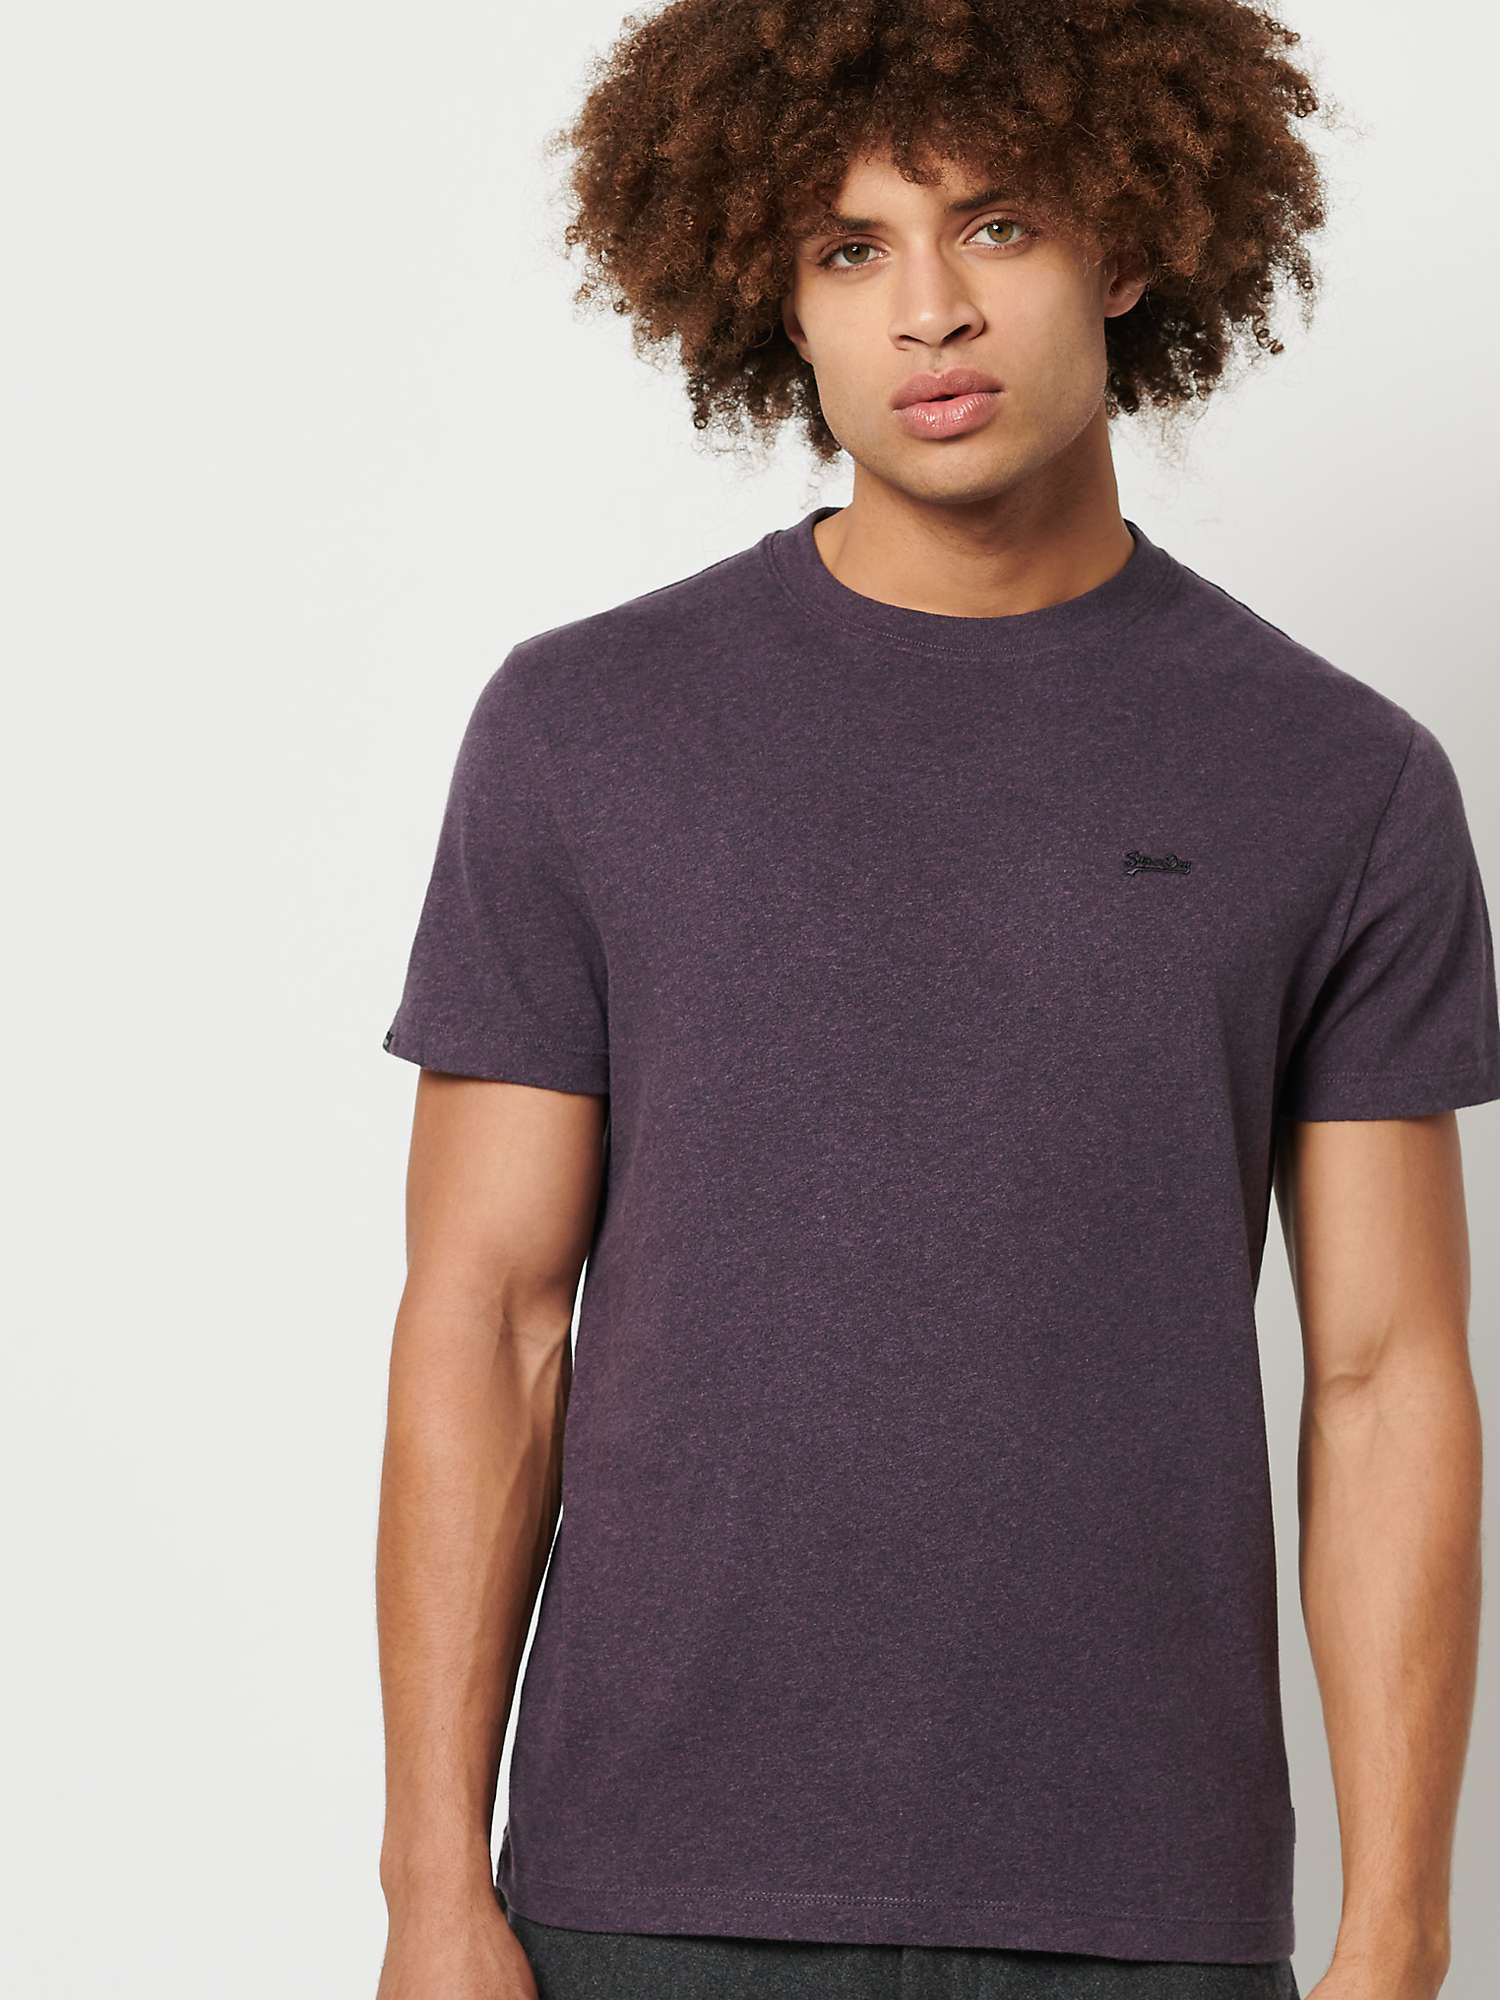 Buy Superdry Organic Cotton Vintage Embroidered T-Shirt Online at johnlewis.com